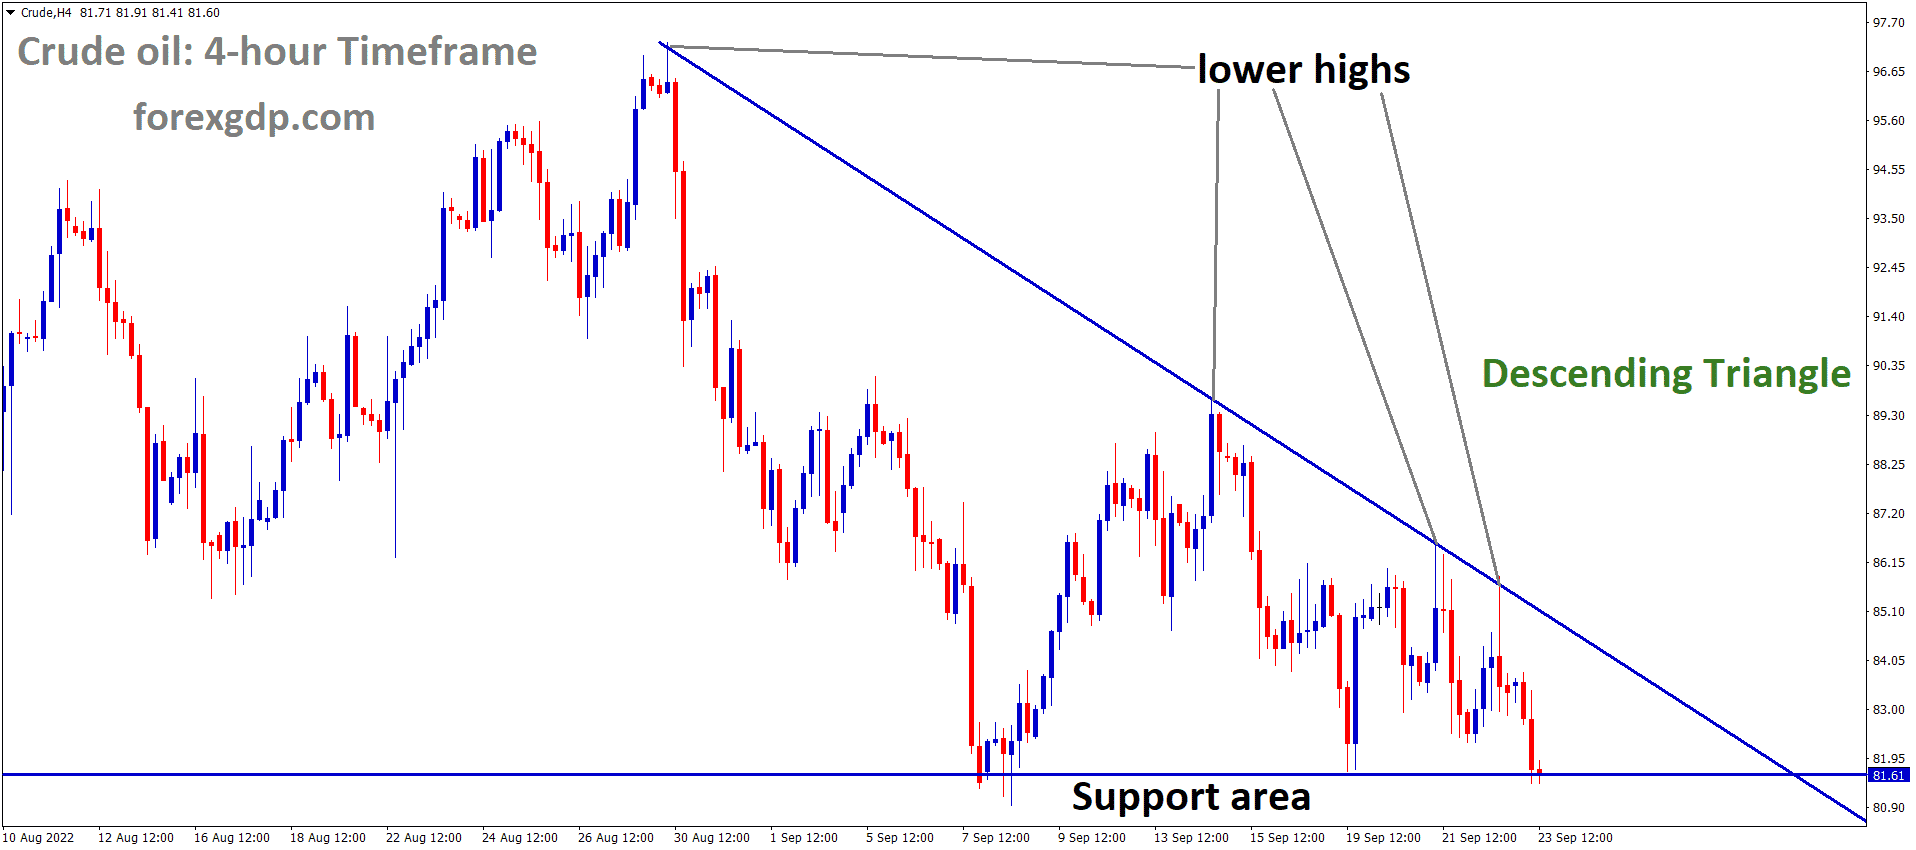 Crude Oil price is moving in the Descending triangle pattern and the market has reached the horizontal support area of the pattern